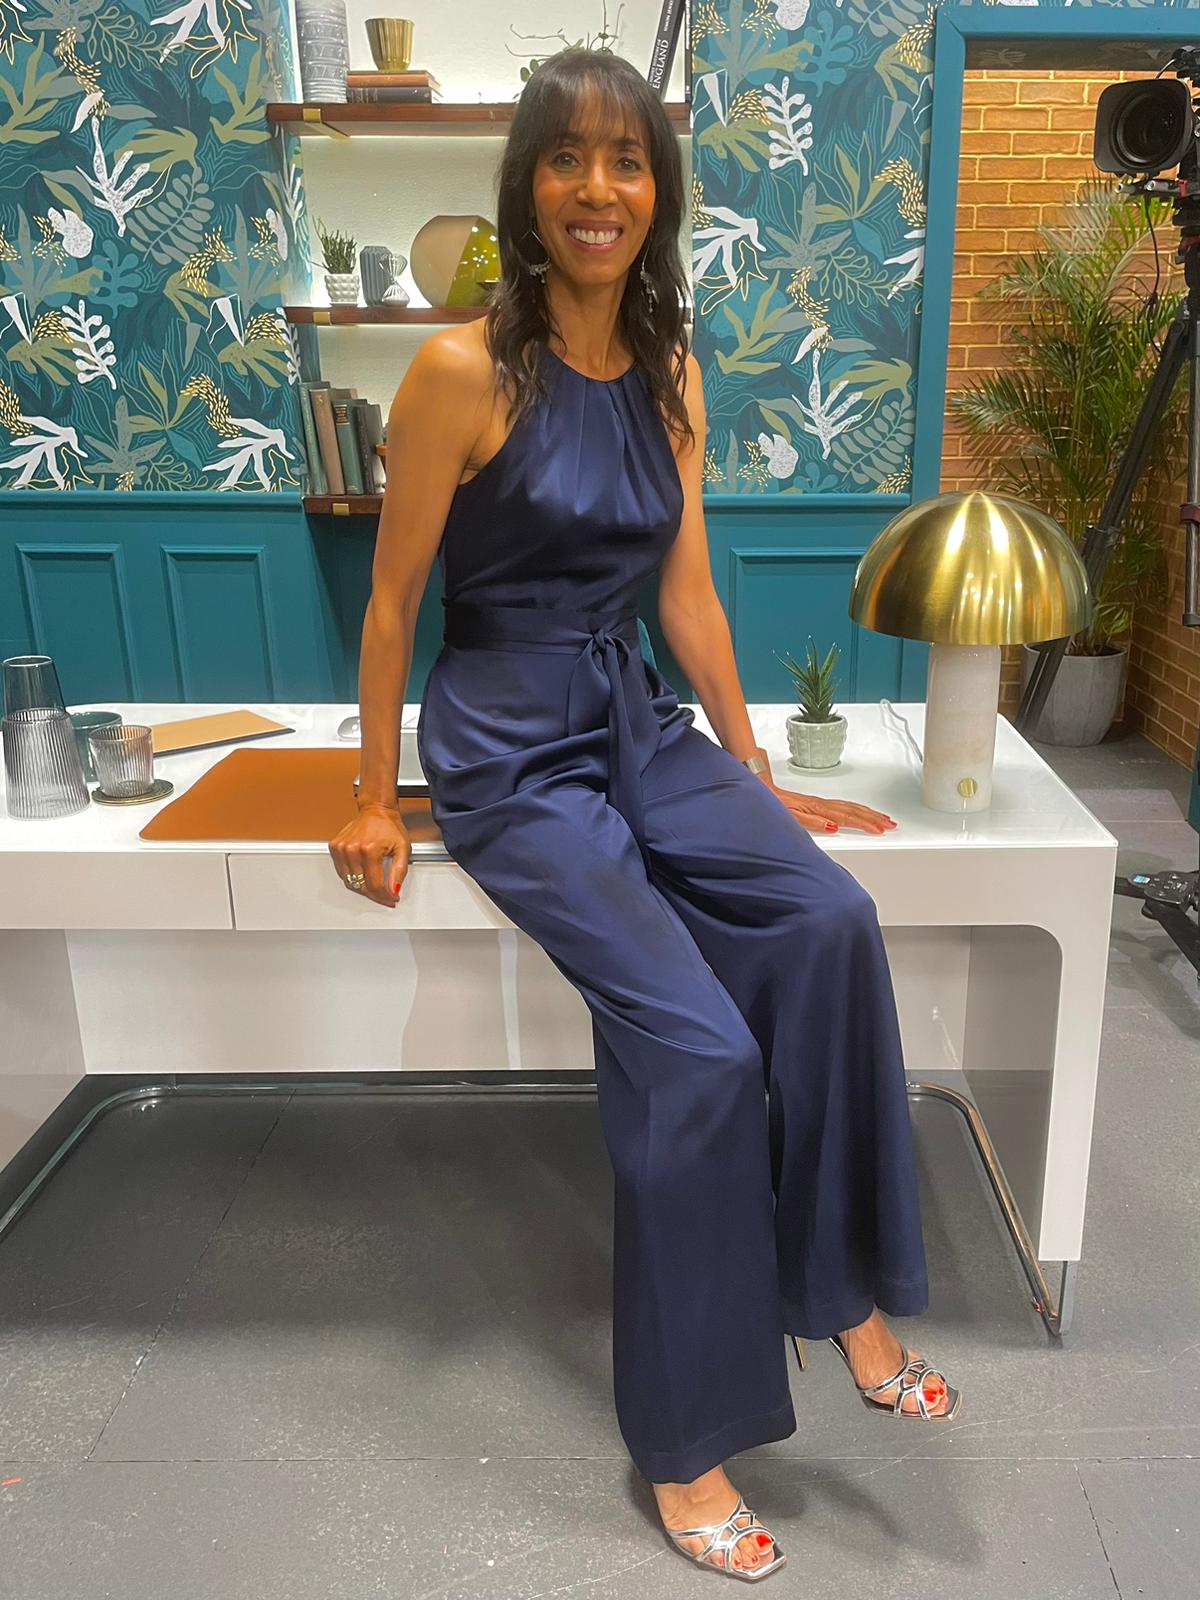 In My Shoes: Michelle Ogundehin